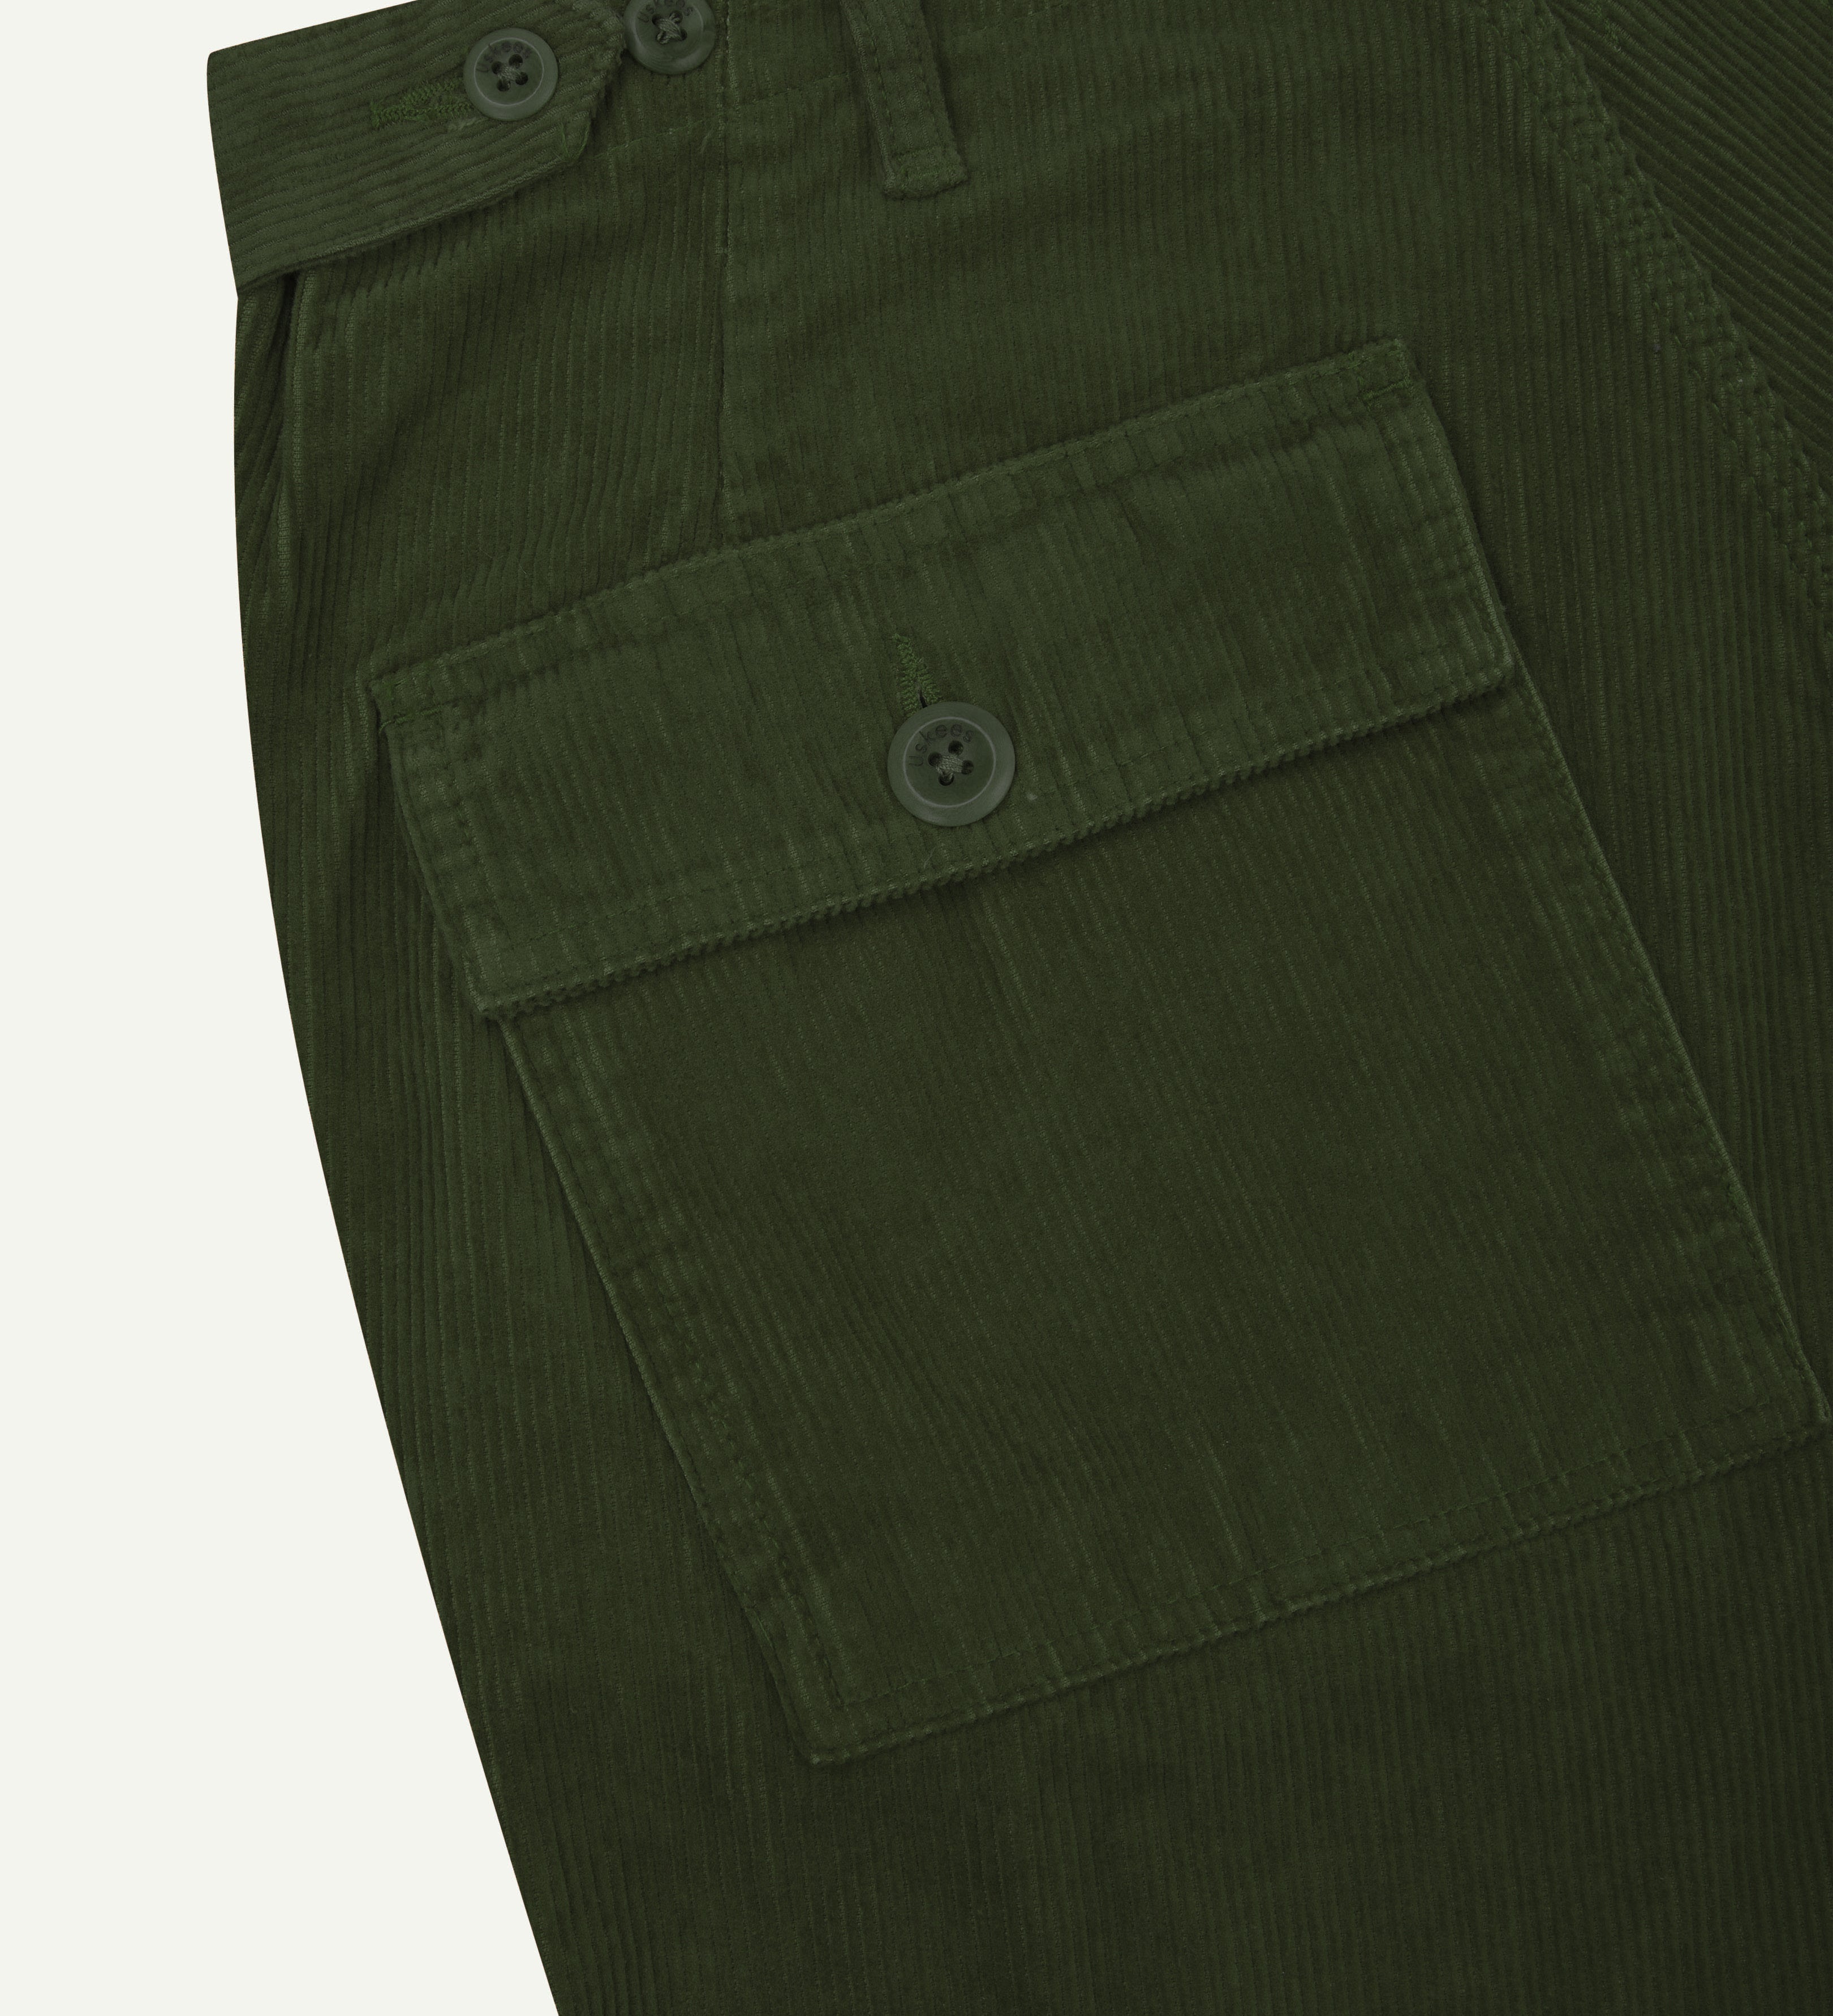 Close up shot of Uskees coriander green #5005 cord workwear pants showing pocket and waist detail.